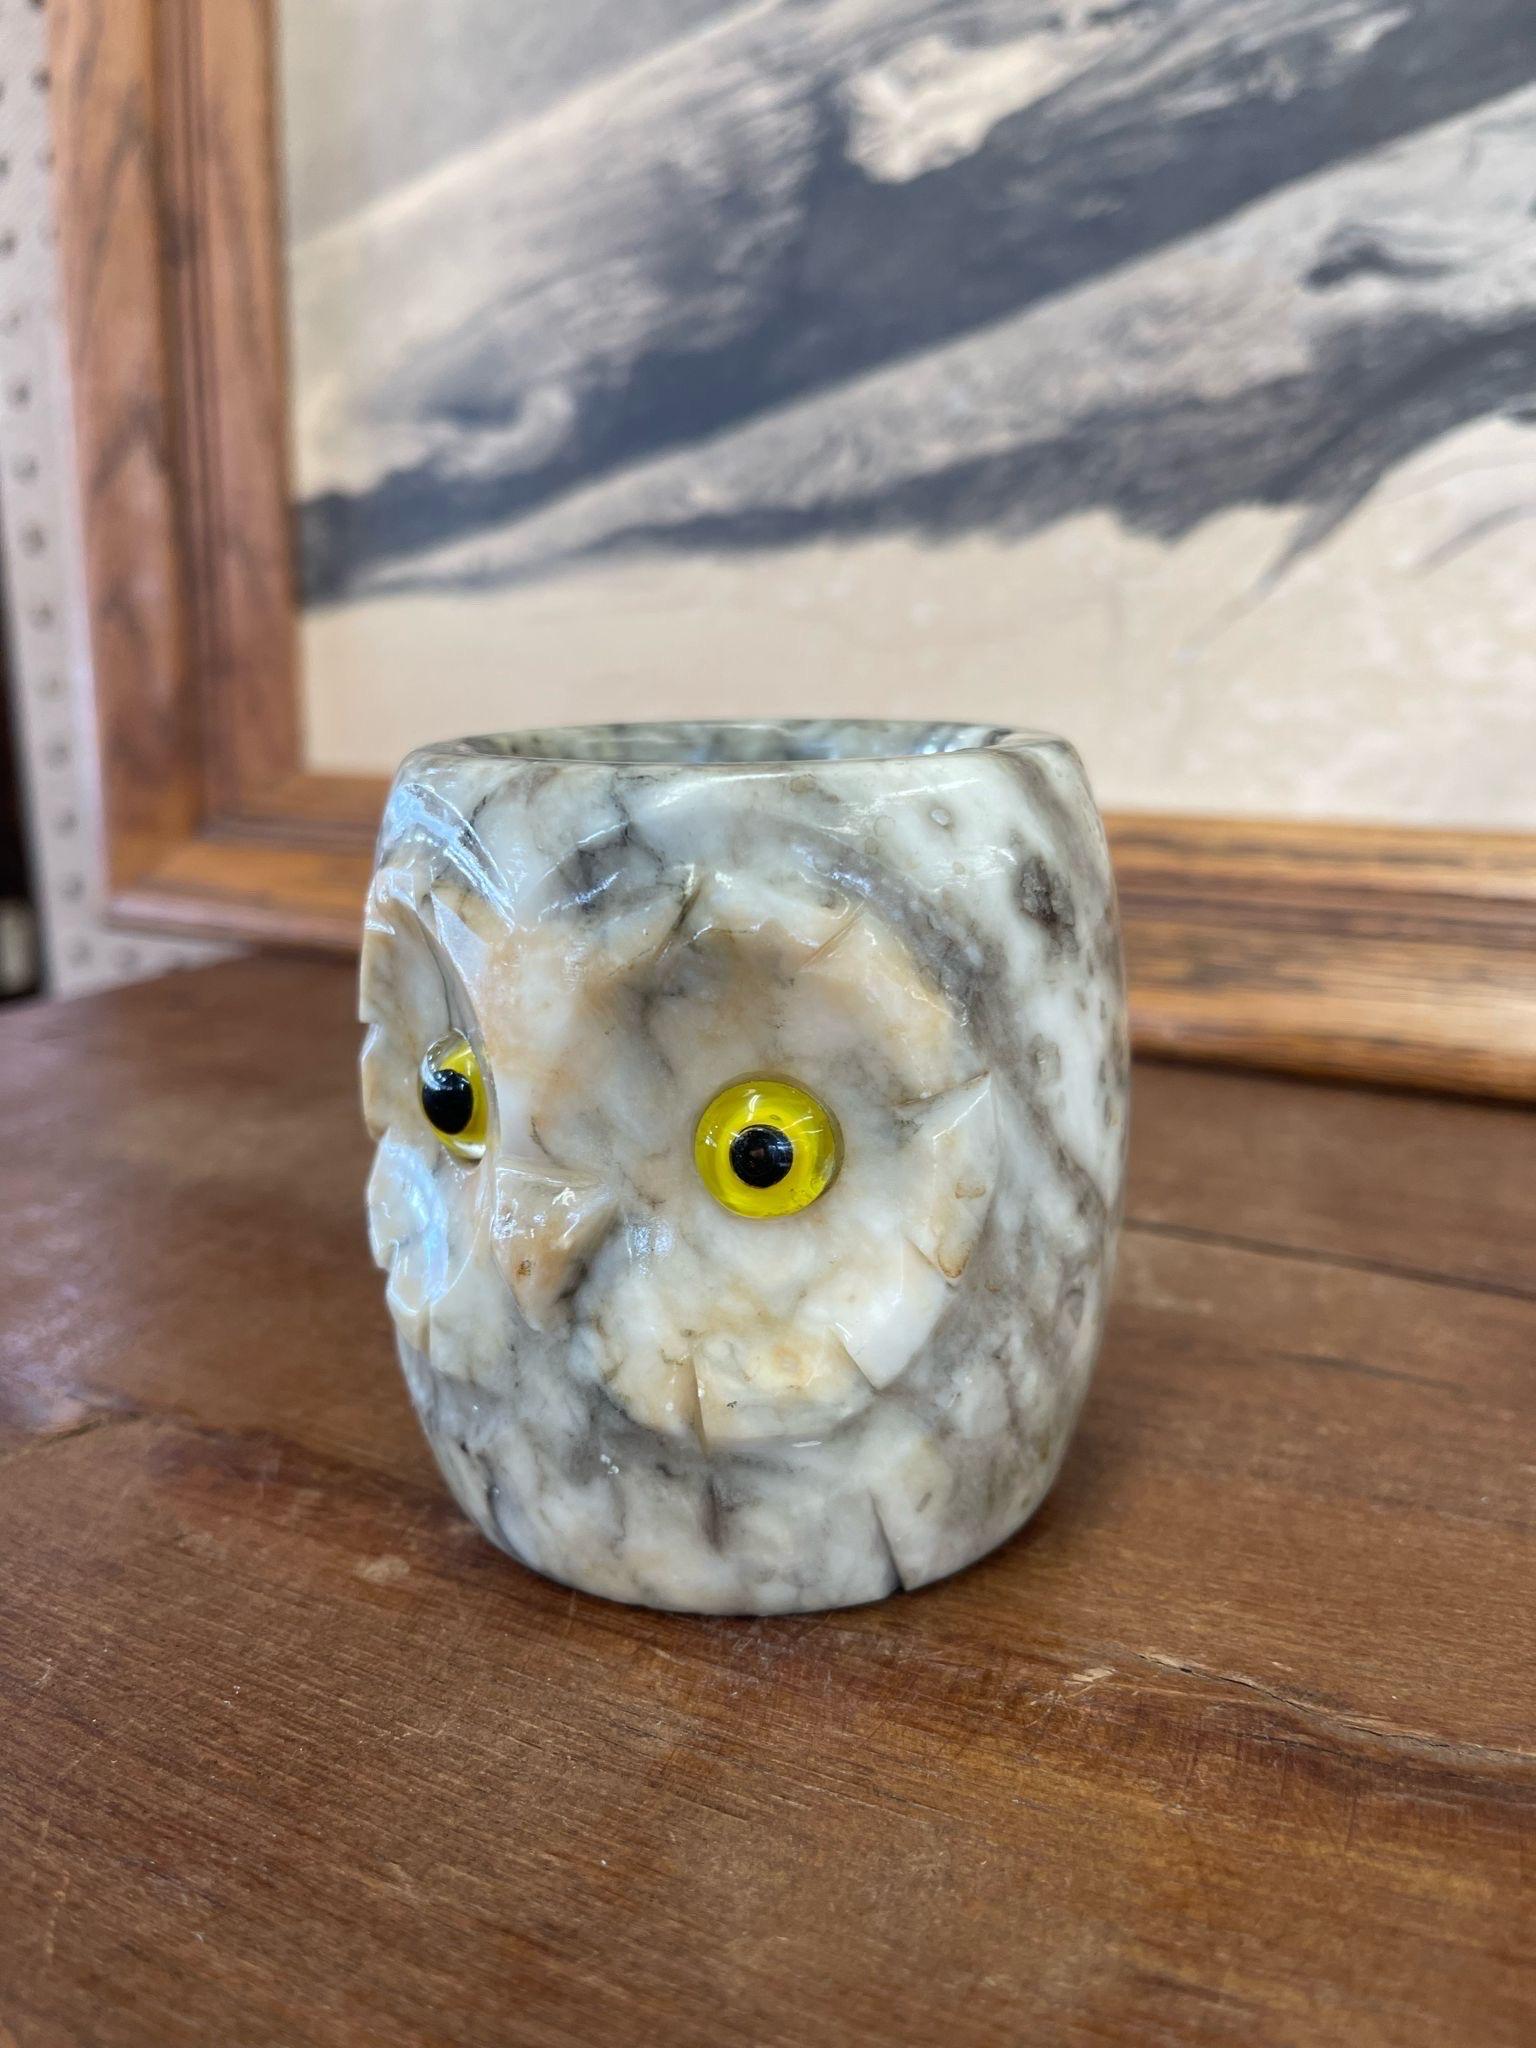 Grey Owl Figurine Cup with Yellow Eyes. Carved From Italian Alabaster. Similar Figurines Available. Vintage Condition Consistent with Age as Pictured.

Dimensions. 3 Diameter; 3 H